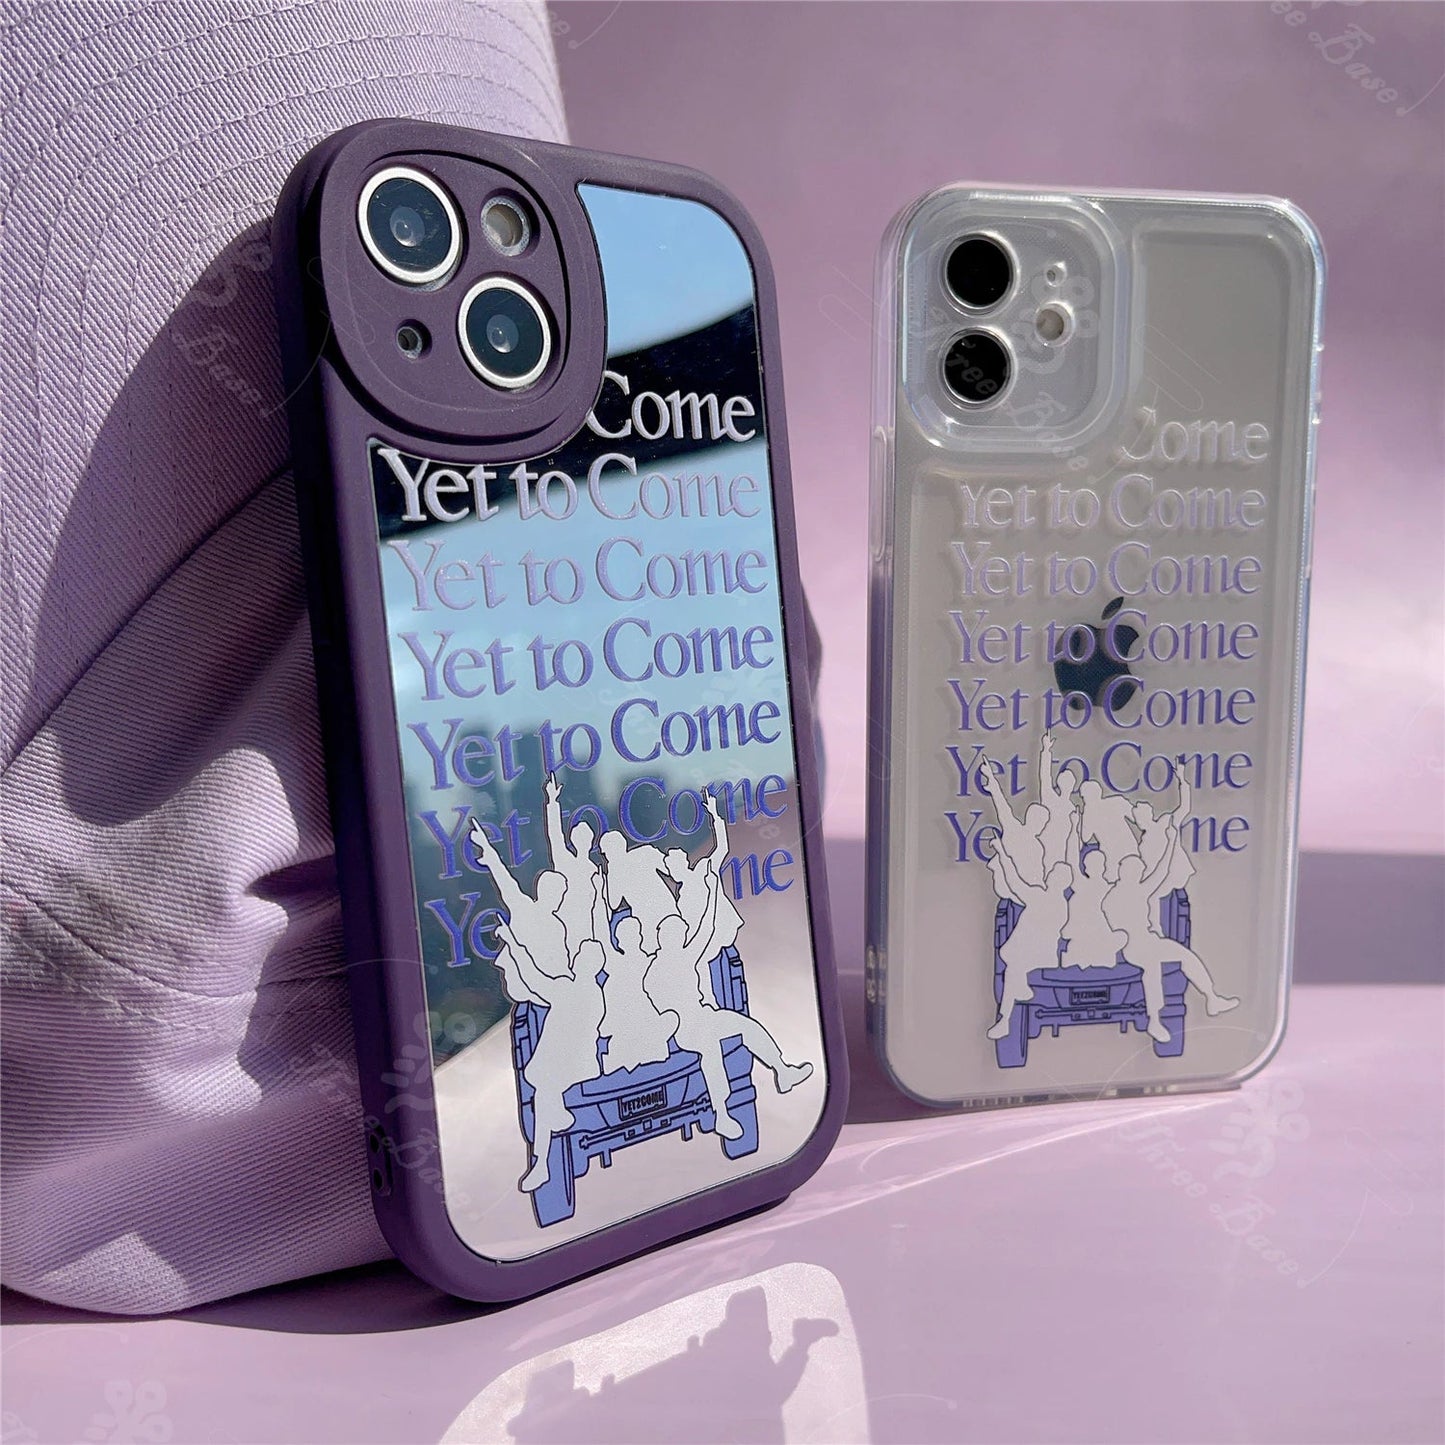 bts yet to come phone case iphone samsung tsuvishop pop store